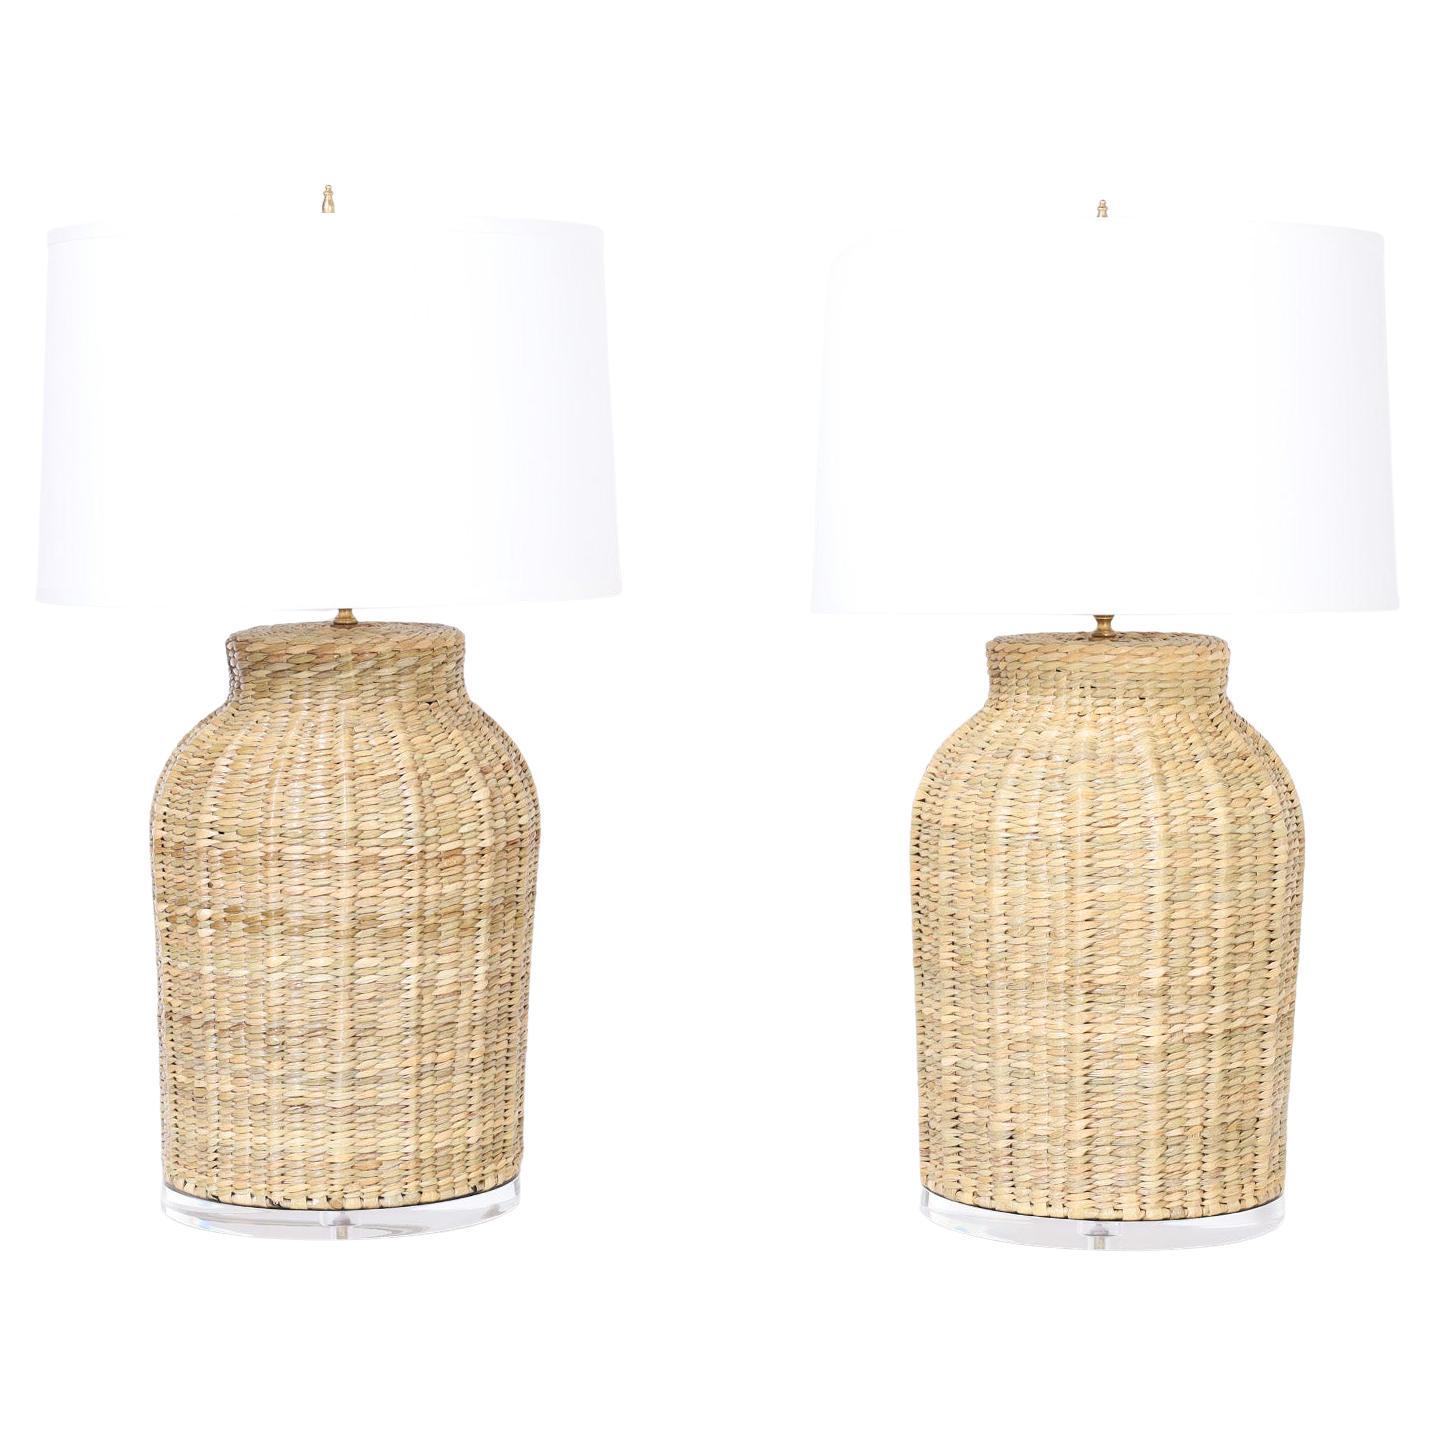 Pair of Wicker Bottle Form Table Lamps from the FS Flores Collection For Sale